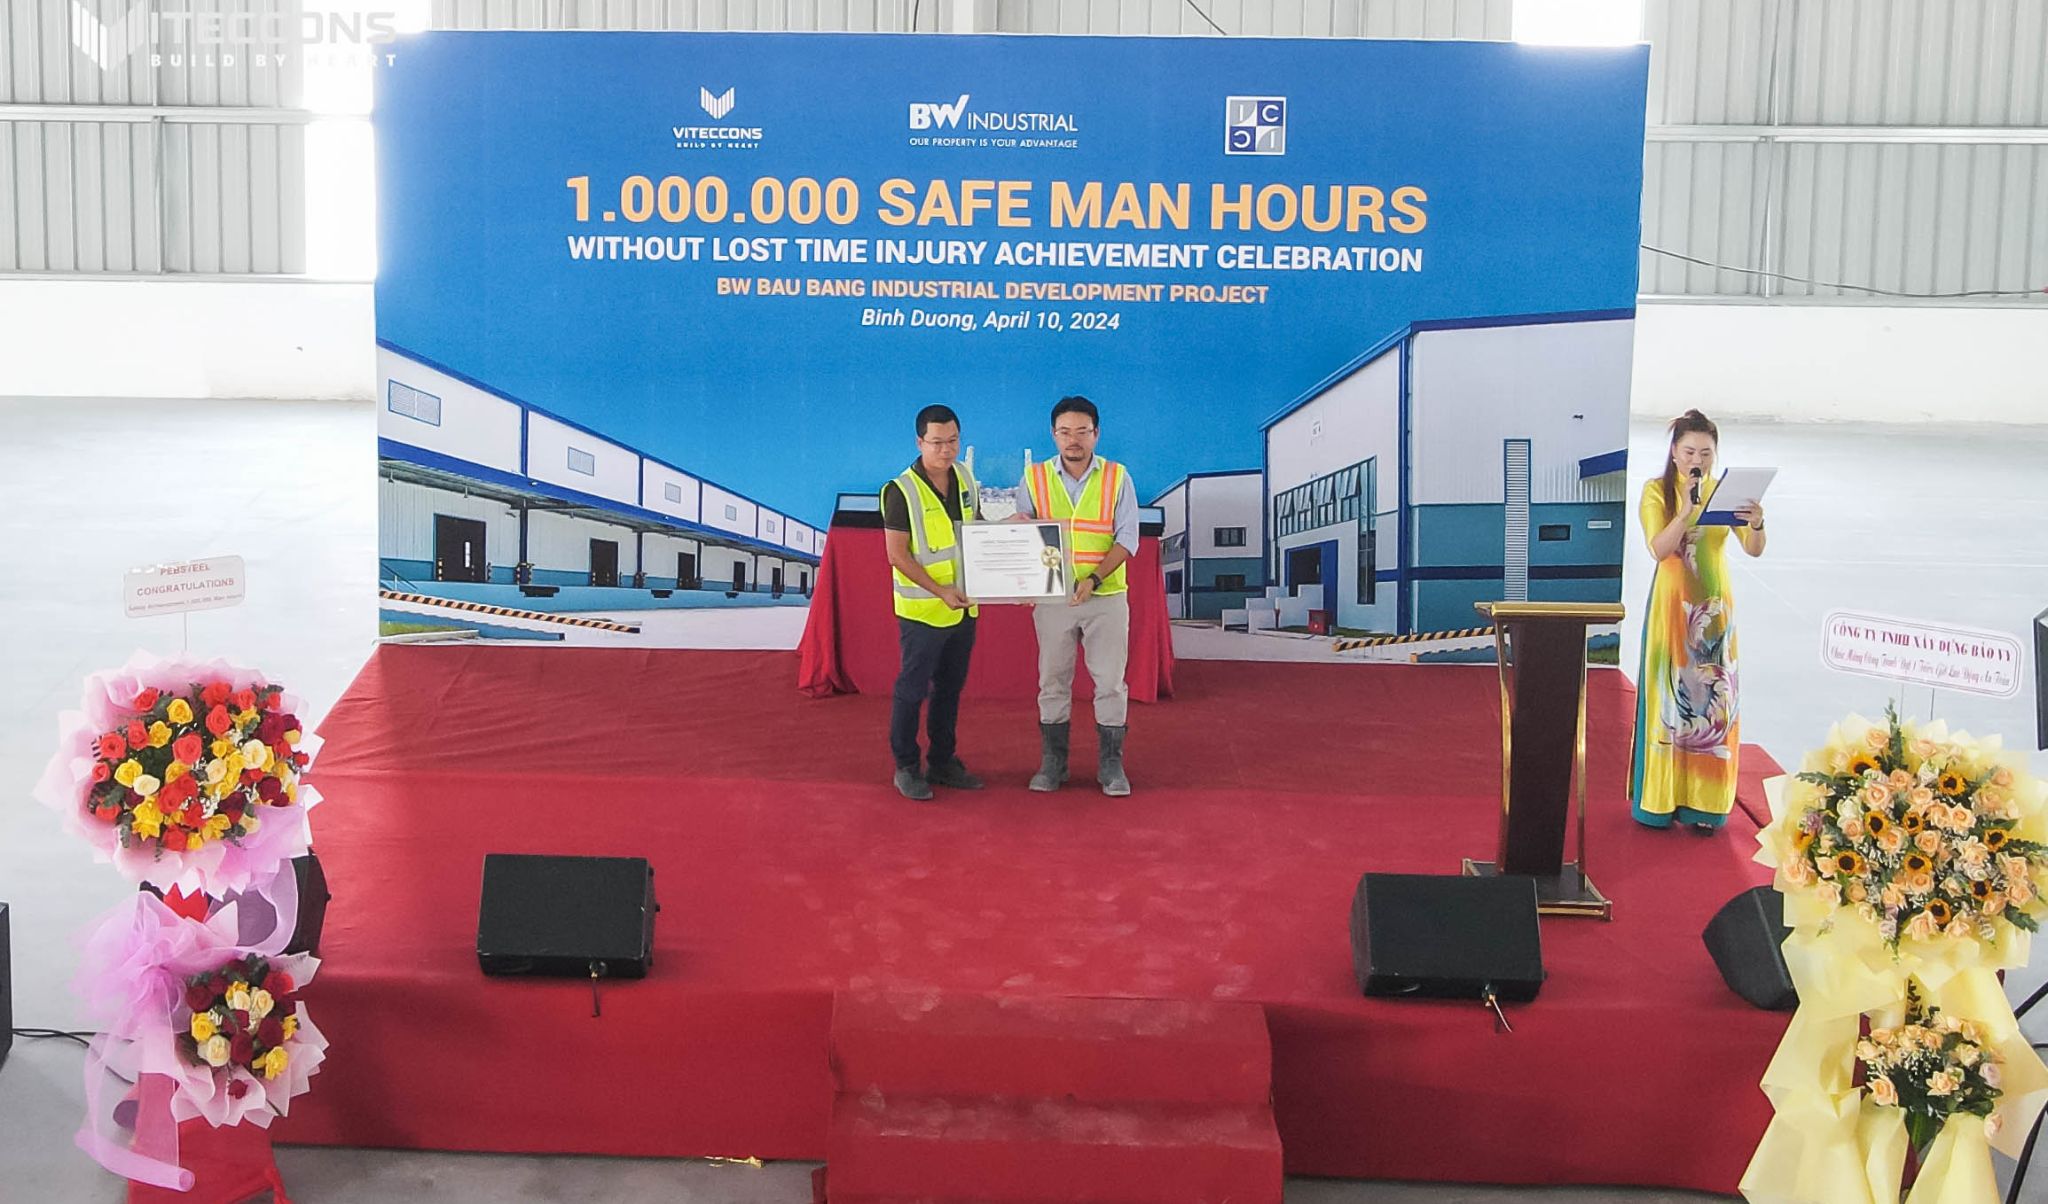 CONGRATULATIONS TO BW BAU BANG 06 PROJECT FOR ACHIEVING 1 MILLION SAFE WORKING HOURS CERTIFICATION.